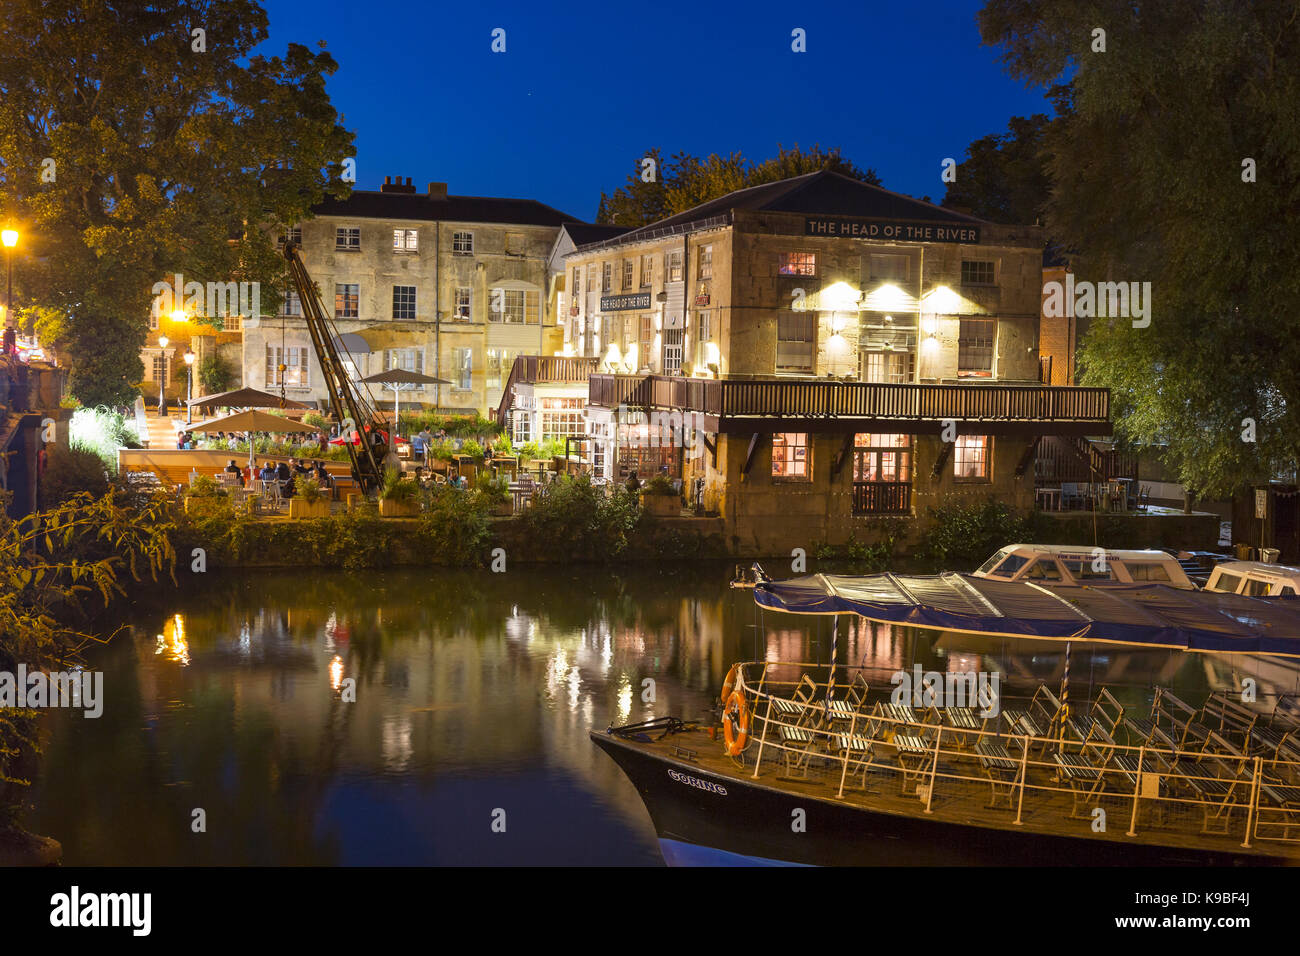 The Head of the River Oxford Oxfordshire England Stock Photo